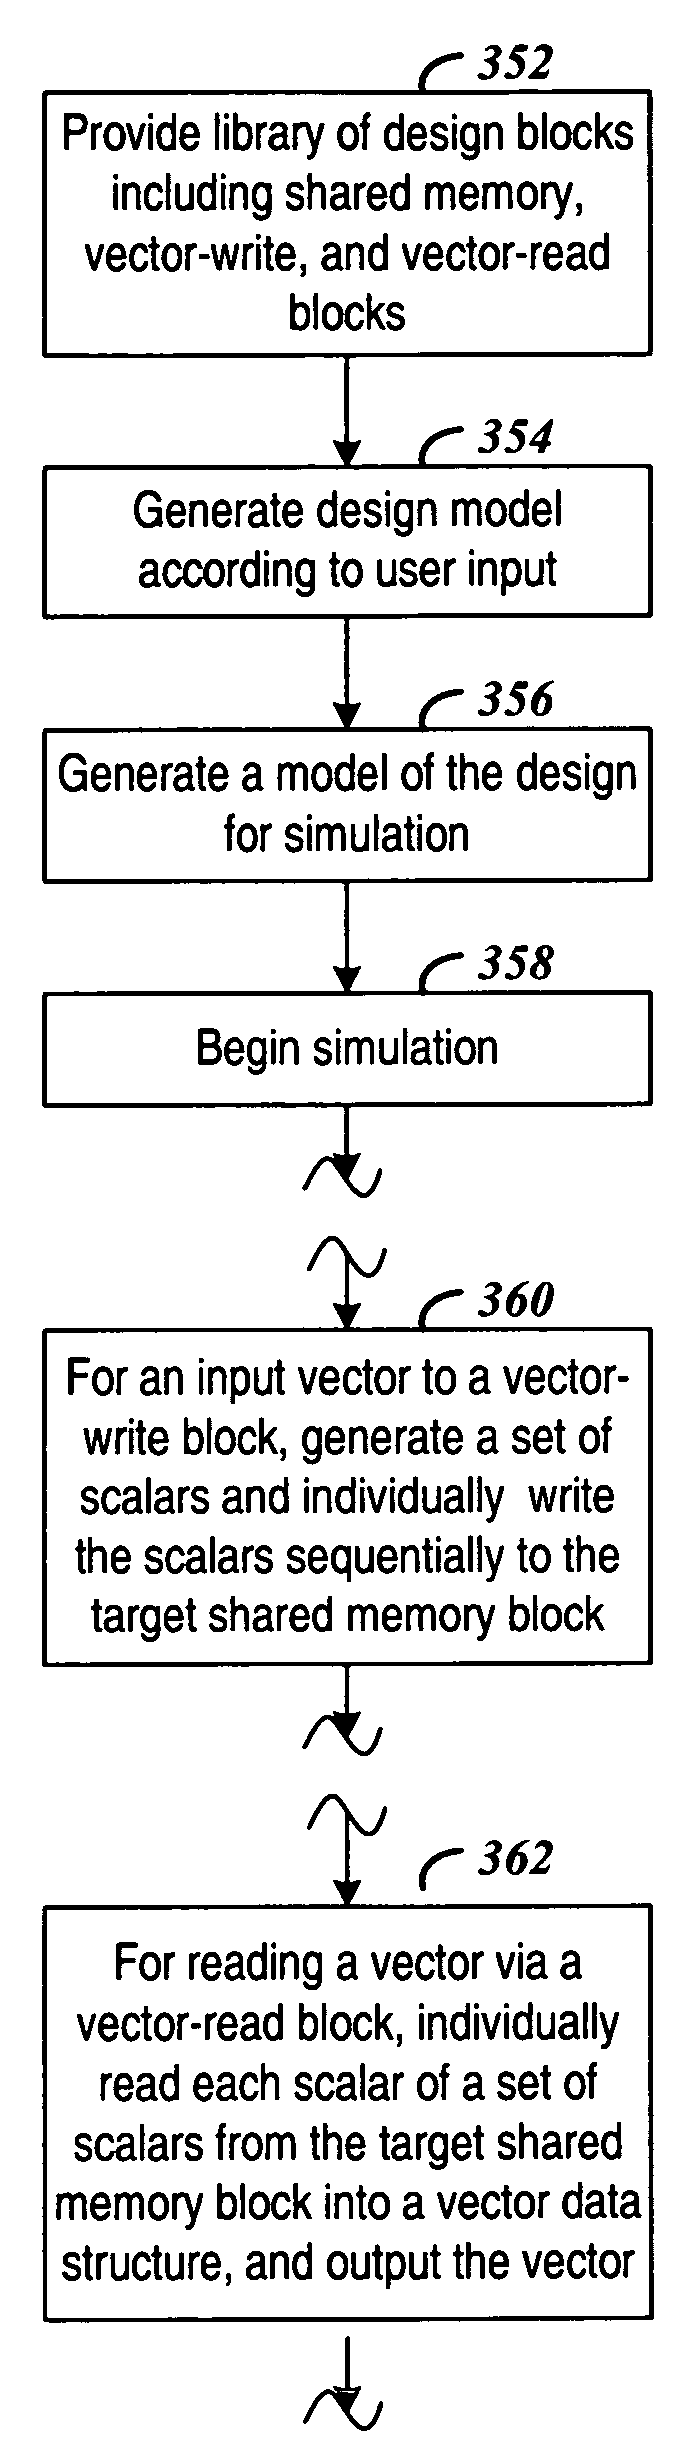 Vector interface to shared memory in simulating a circuit design